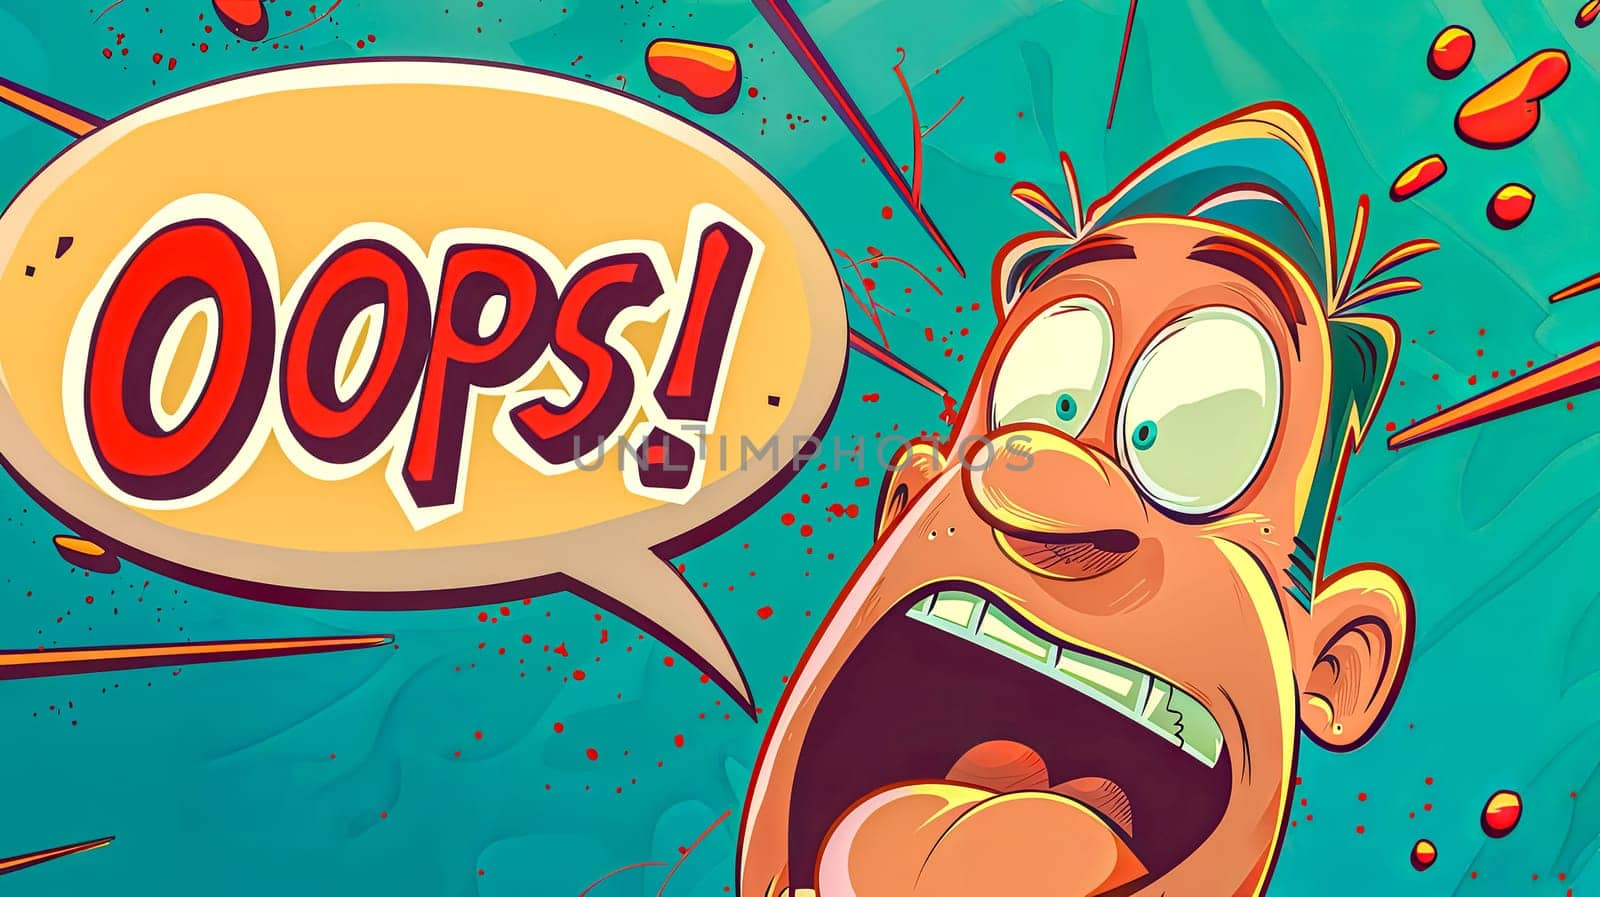 Colorful cartoon illustration of a character's funny reaction with an oops! speech bubble